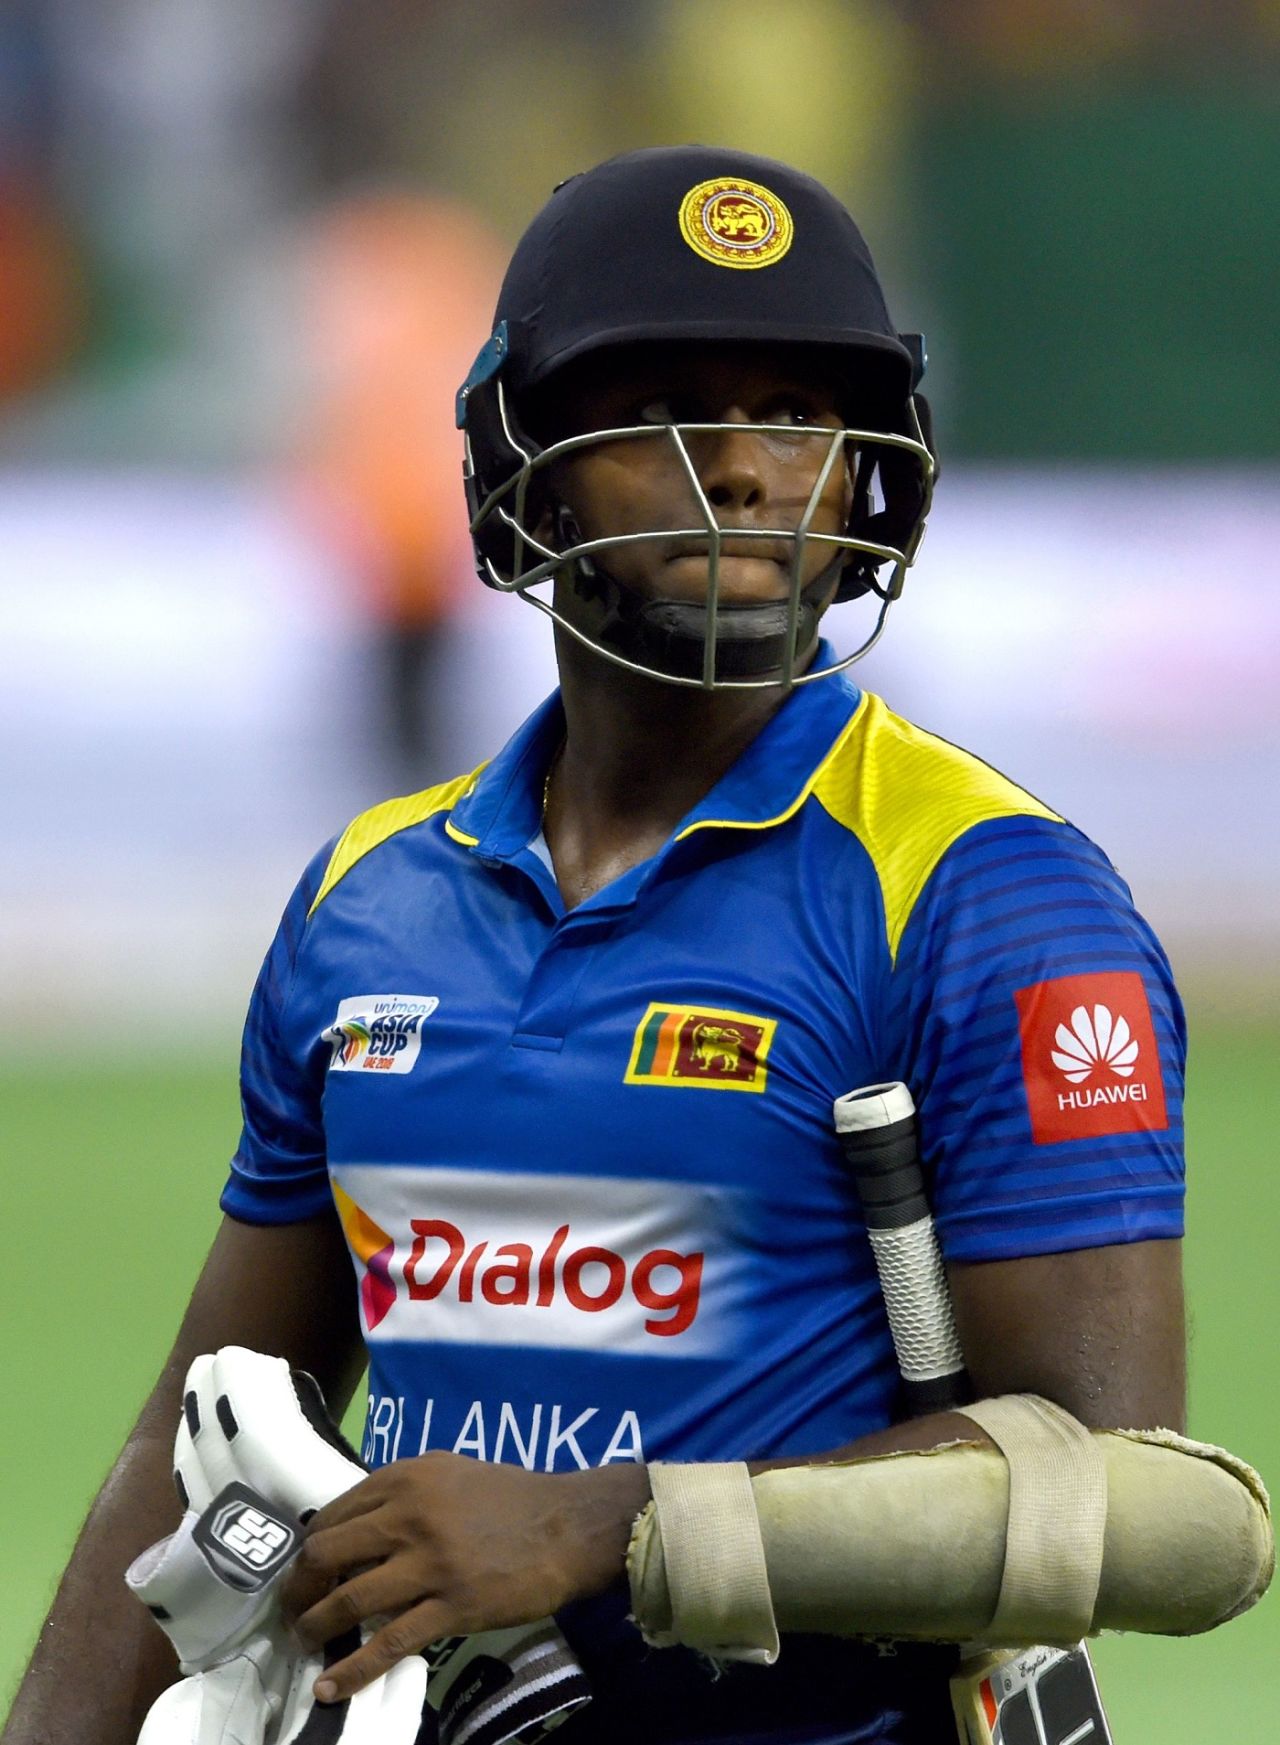 Angelo Mathews is disappointed at getting out, Sri Lanka v Bangladesh, Asia Cup 2018, Dubai, September 15, 2018